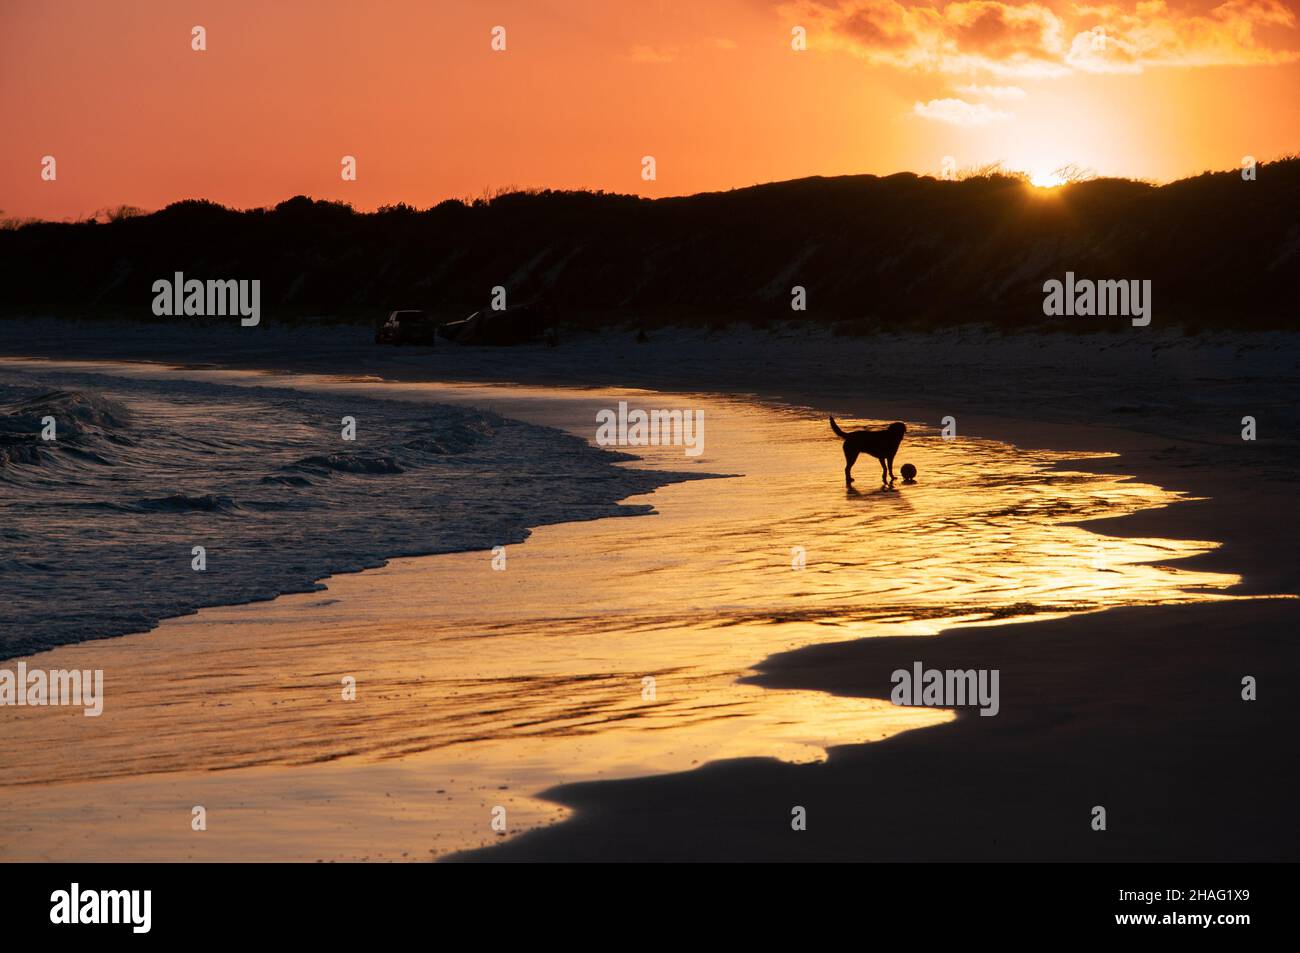 Dog silhouette playing on a beach with sunset in the background - Australia. Stock Photo